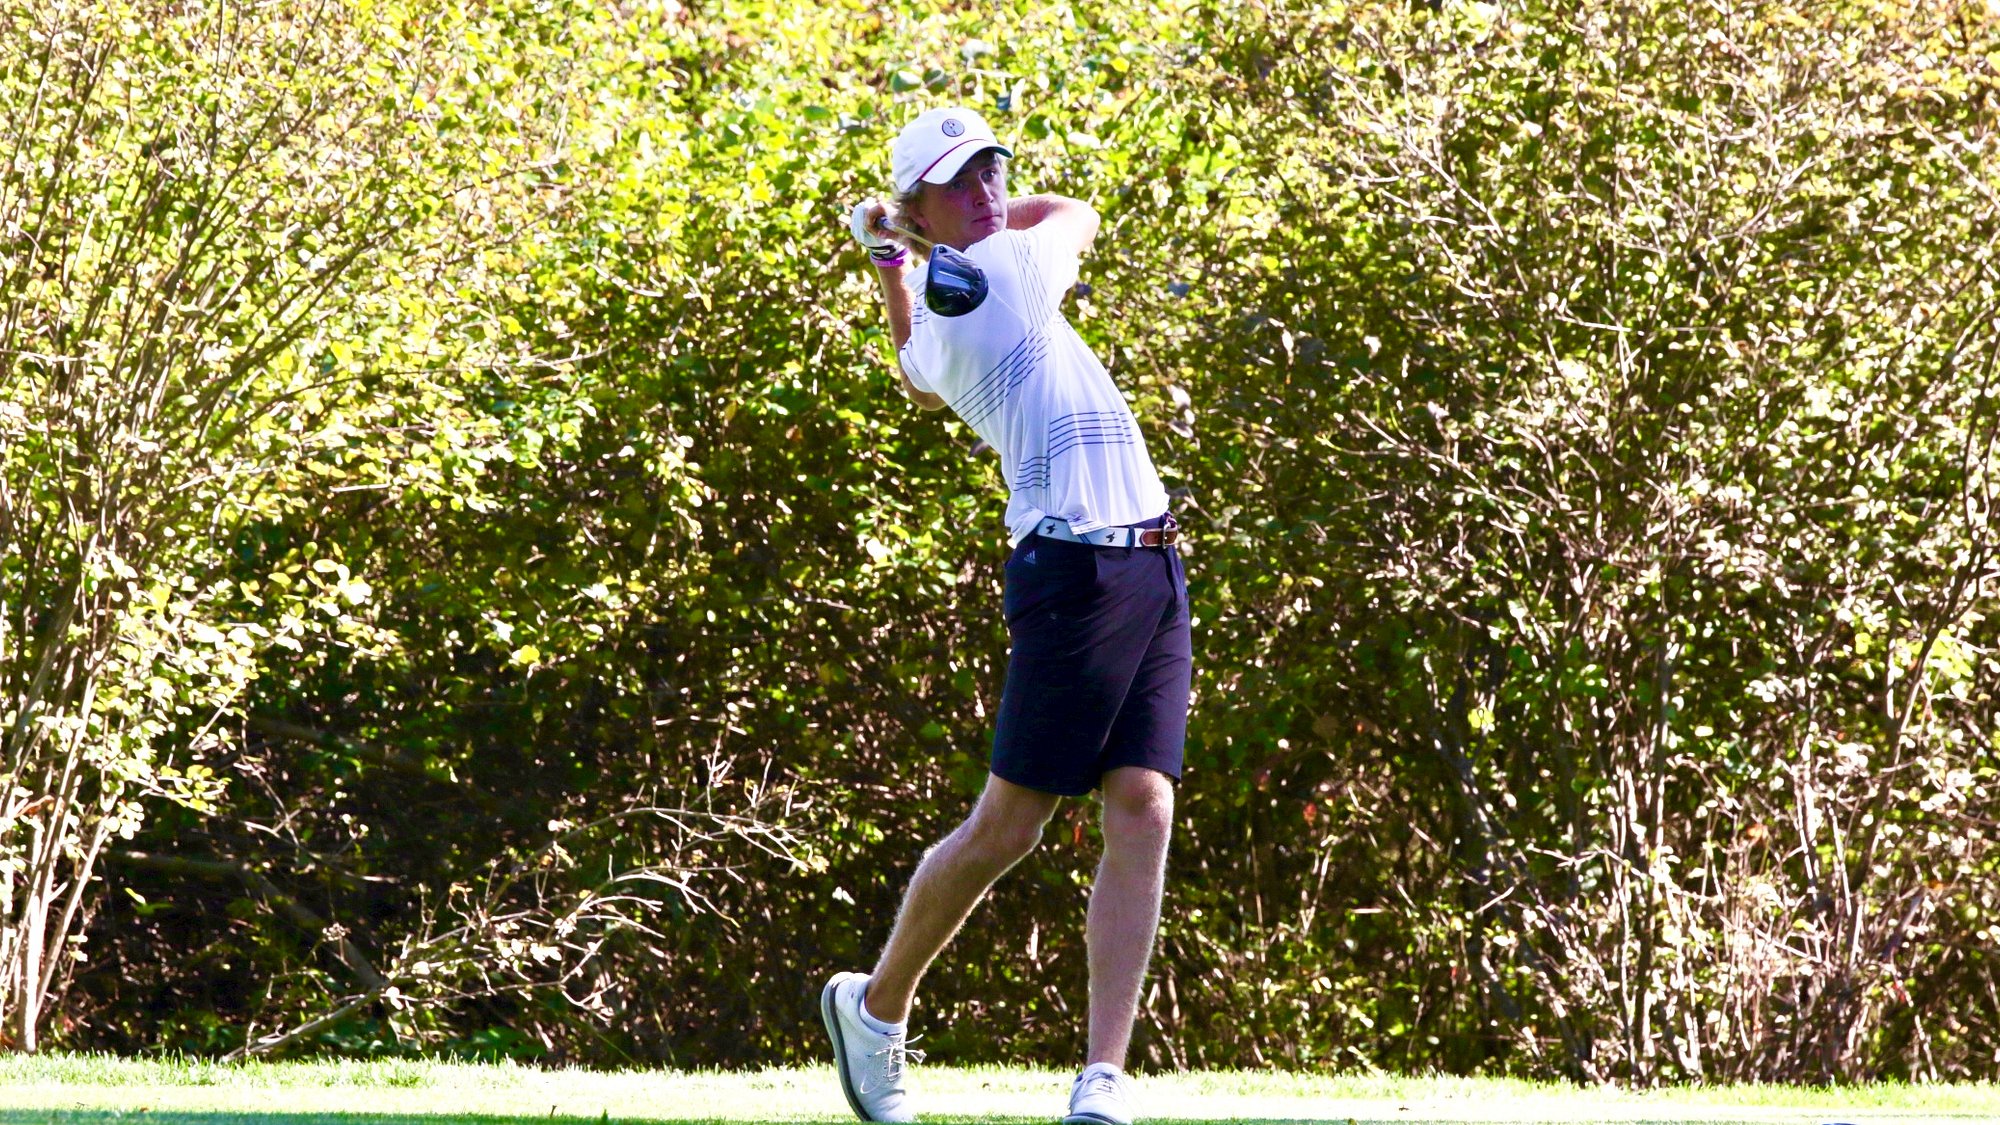 Men’s Golf secures Top 5 finish in Carpetbagger Classic